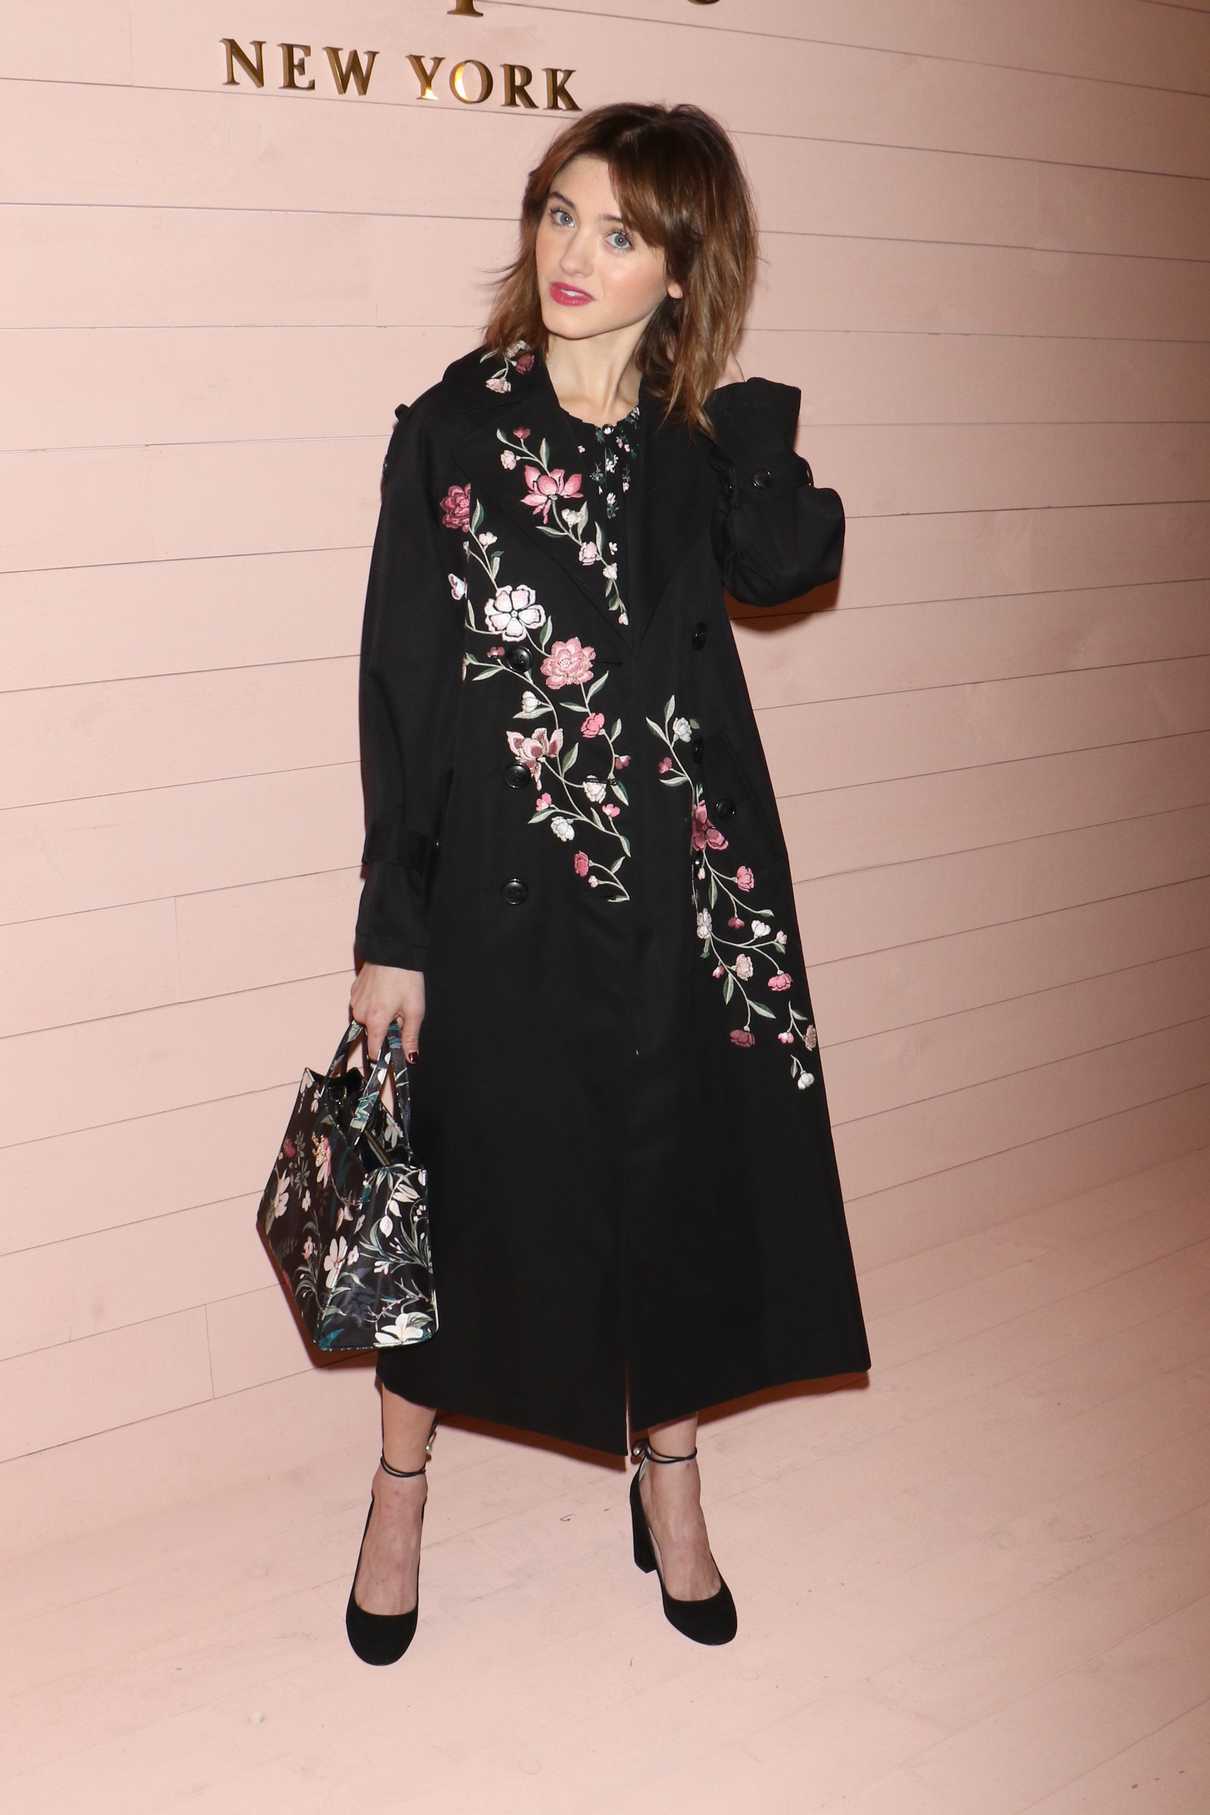 Natalia Dyer at the Kate Spade Presentation During New York Fashion Week in New York City 02/09/2018-3